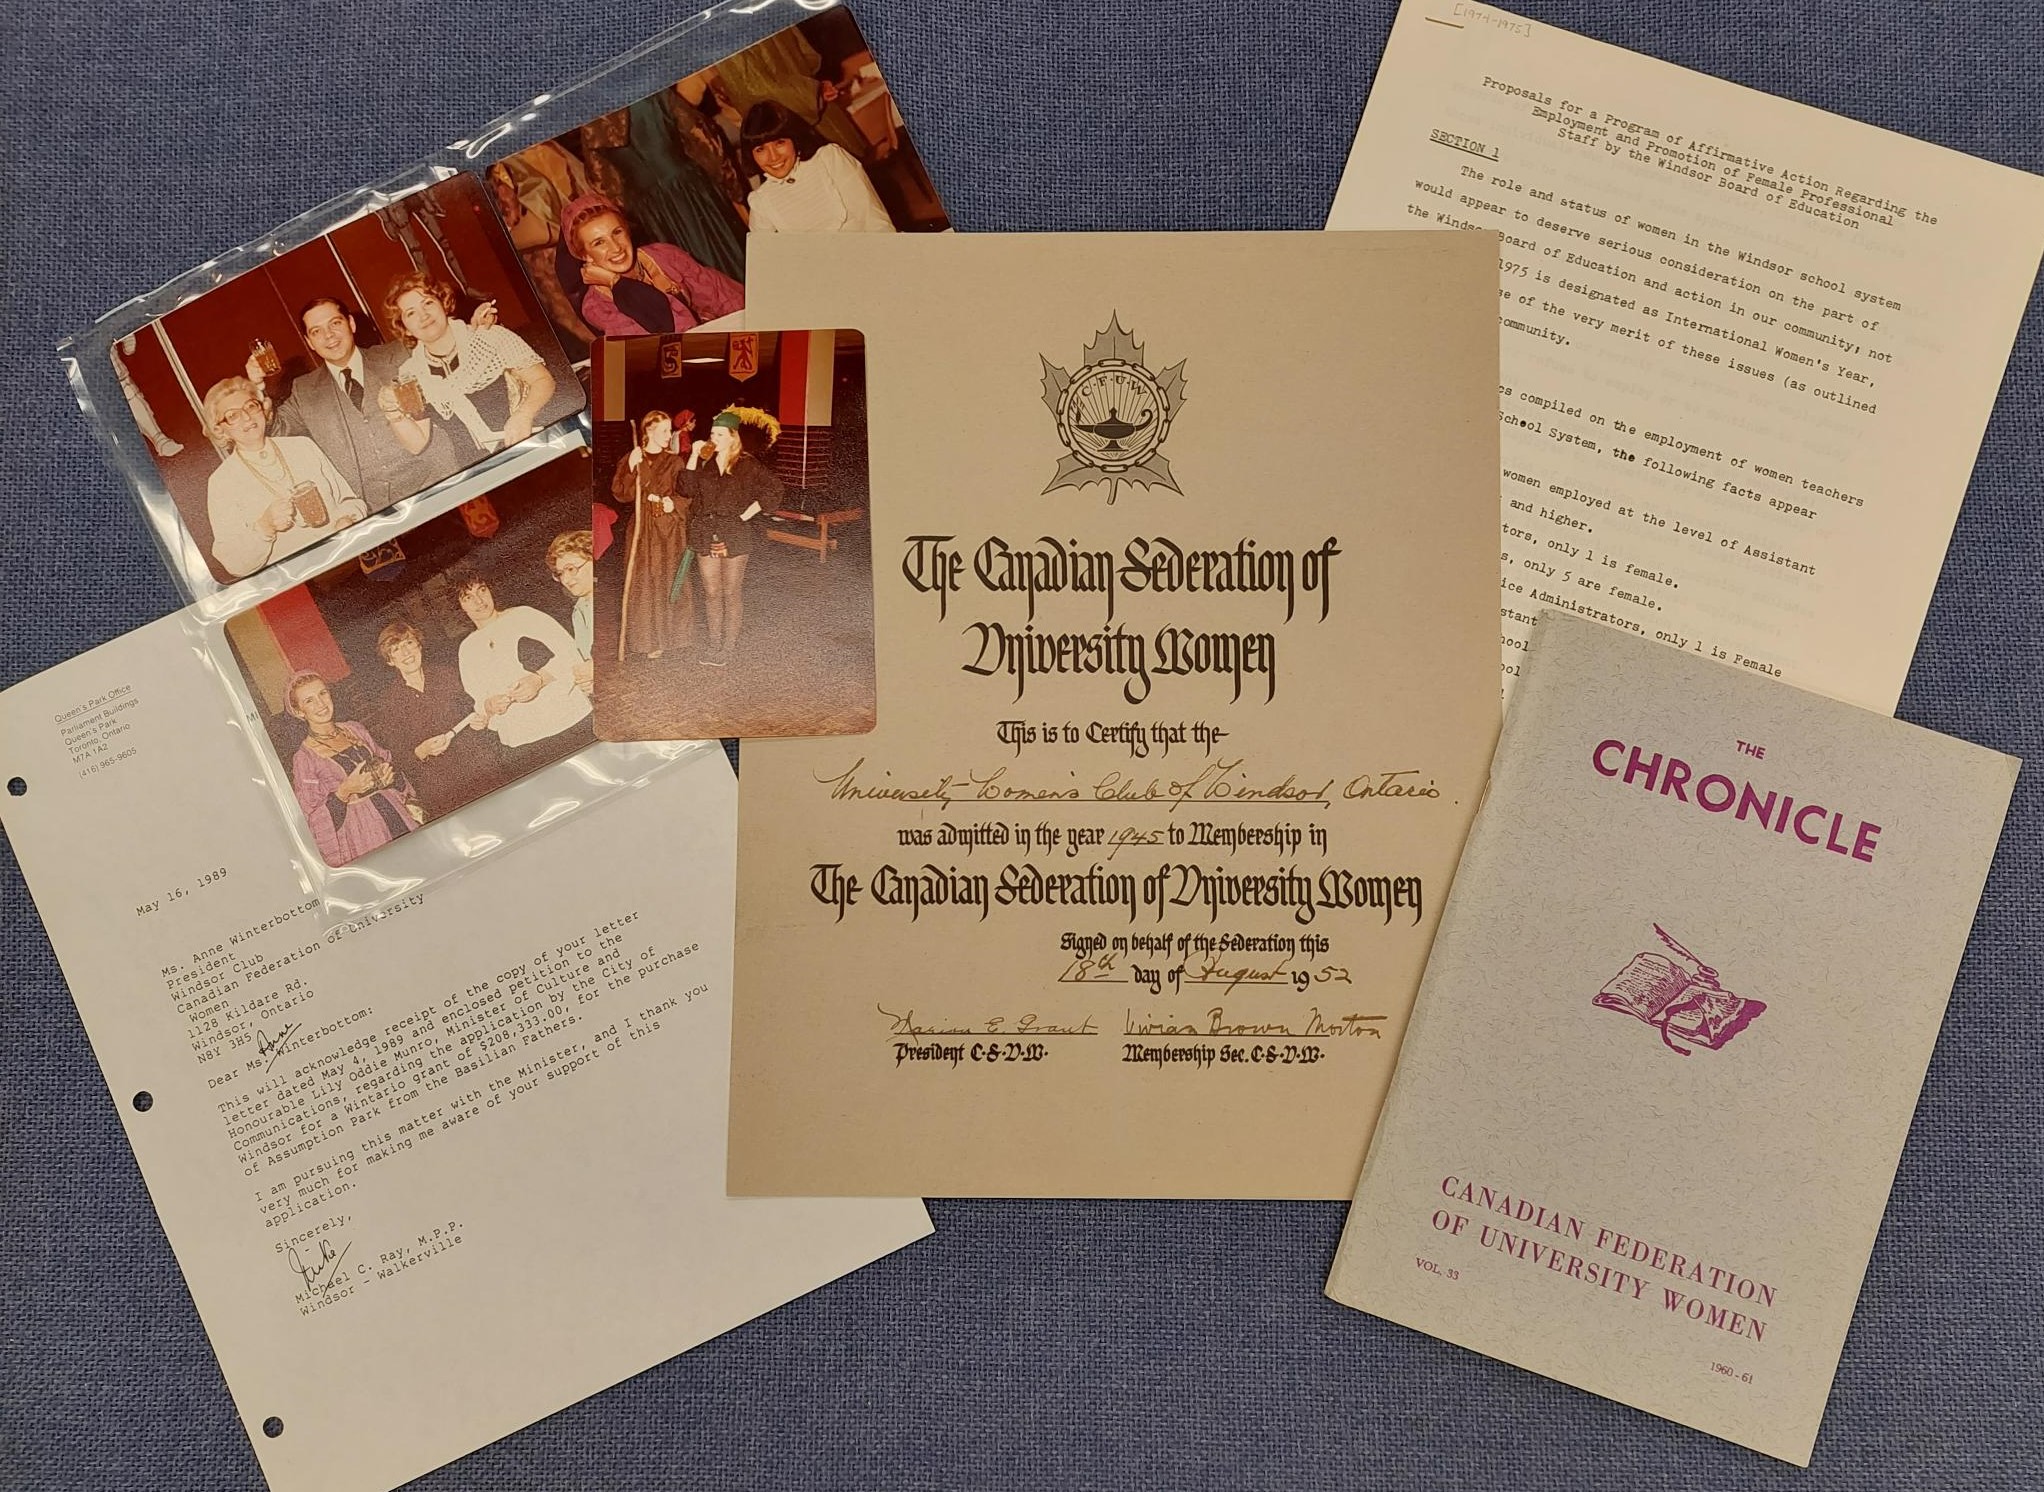 Photos and documents from CFUW collection.